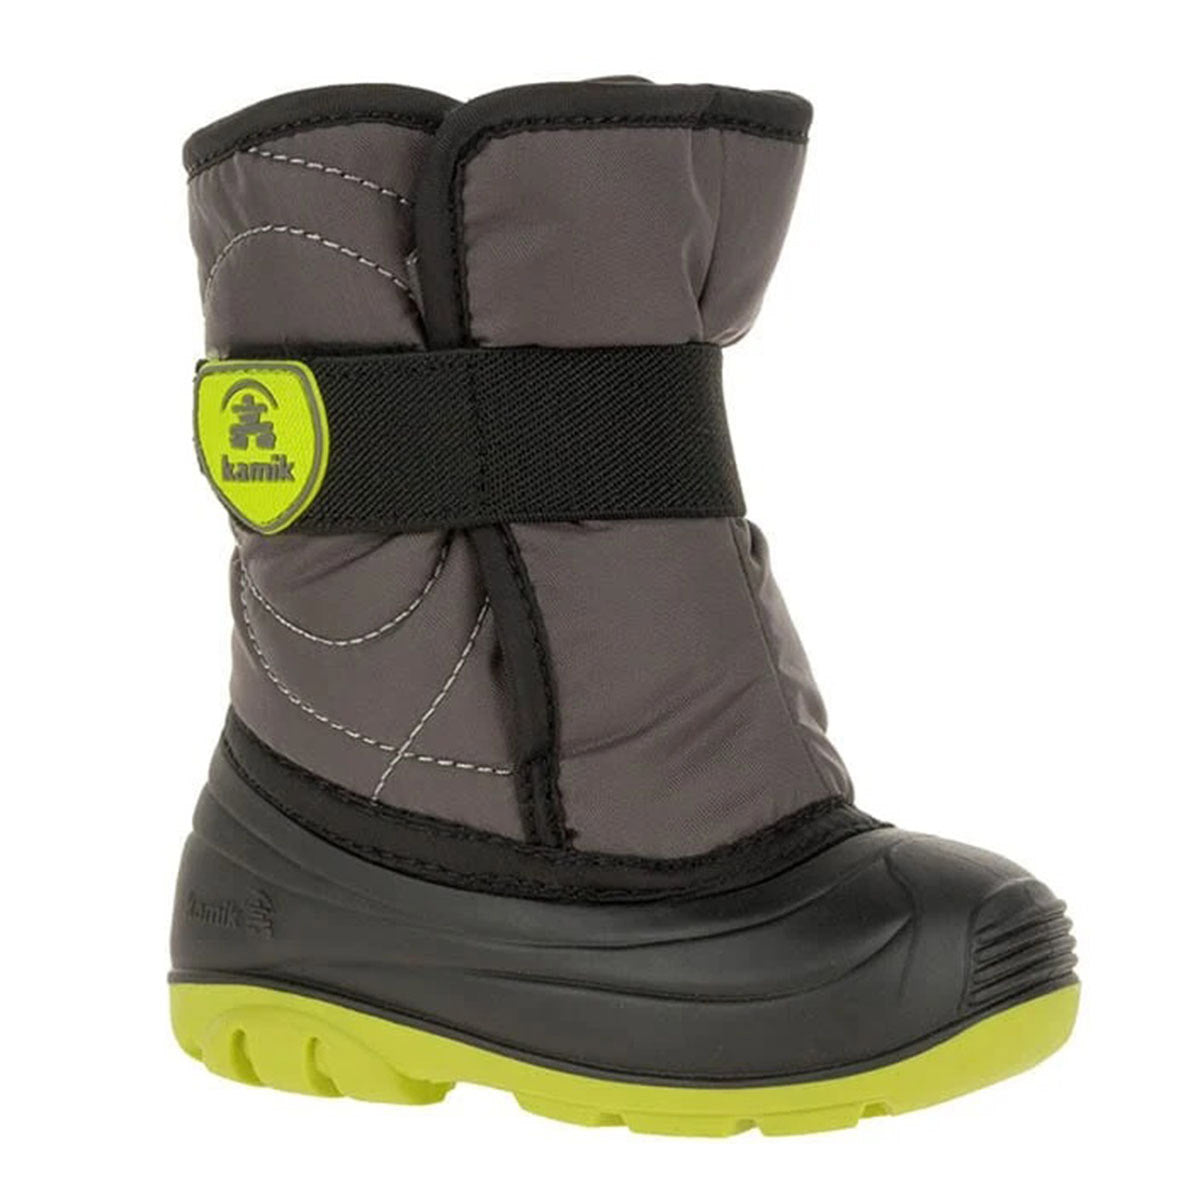 A Kamik toddler snow boot with adjustable velcro strap and a green sole.